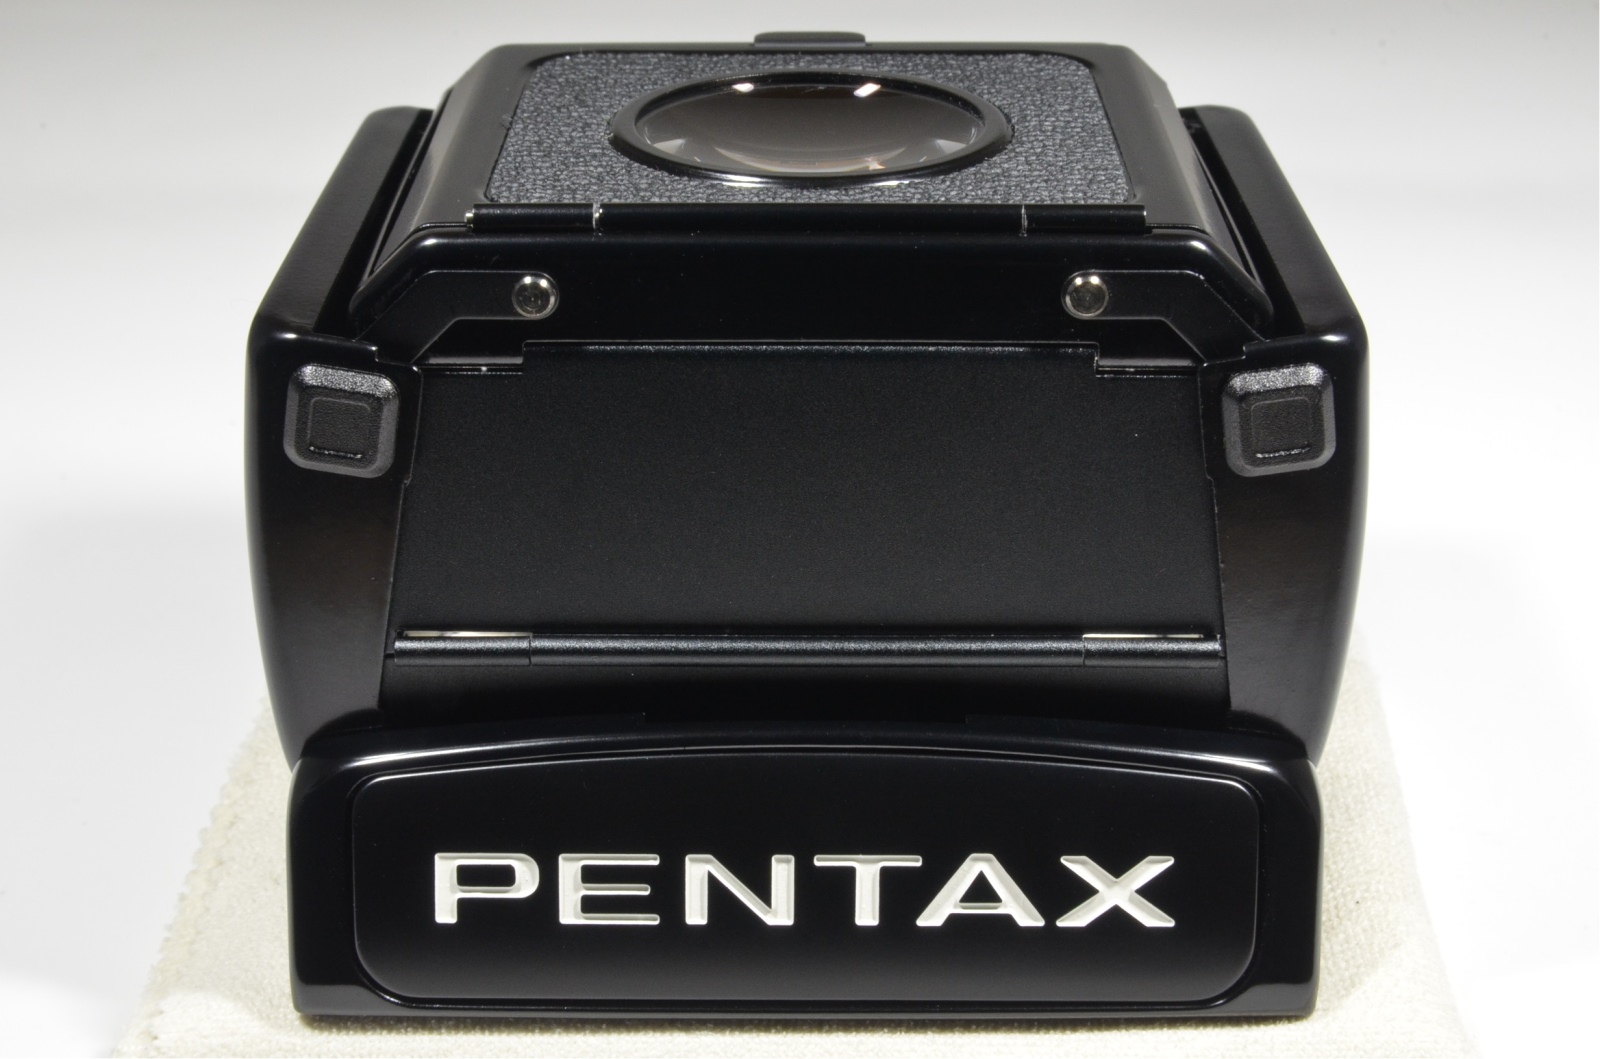 pentax 67 ttl, wood grip, smc 55mm, 75mm, 105mm, 135mm, extension tube and etc..